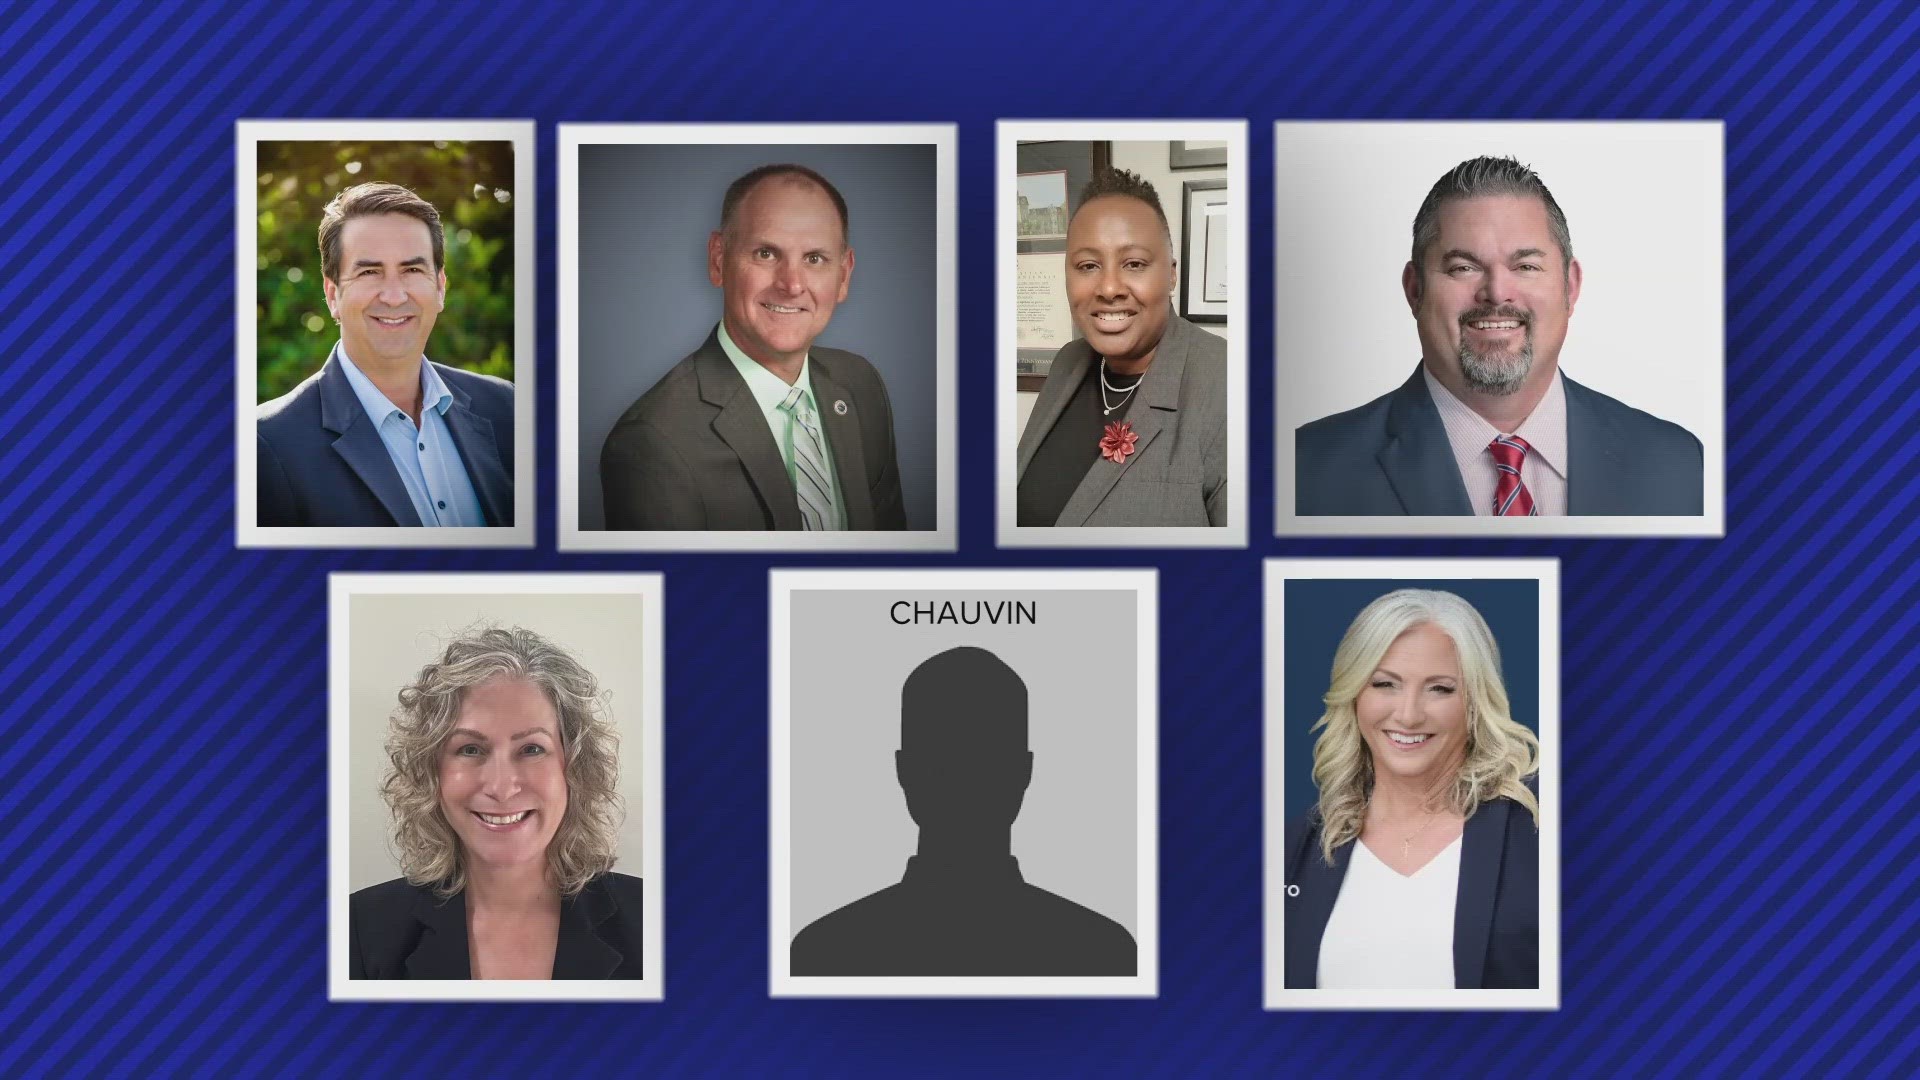 Meet the 7 candidates vying to be the next Terrebonne Parish president